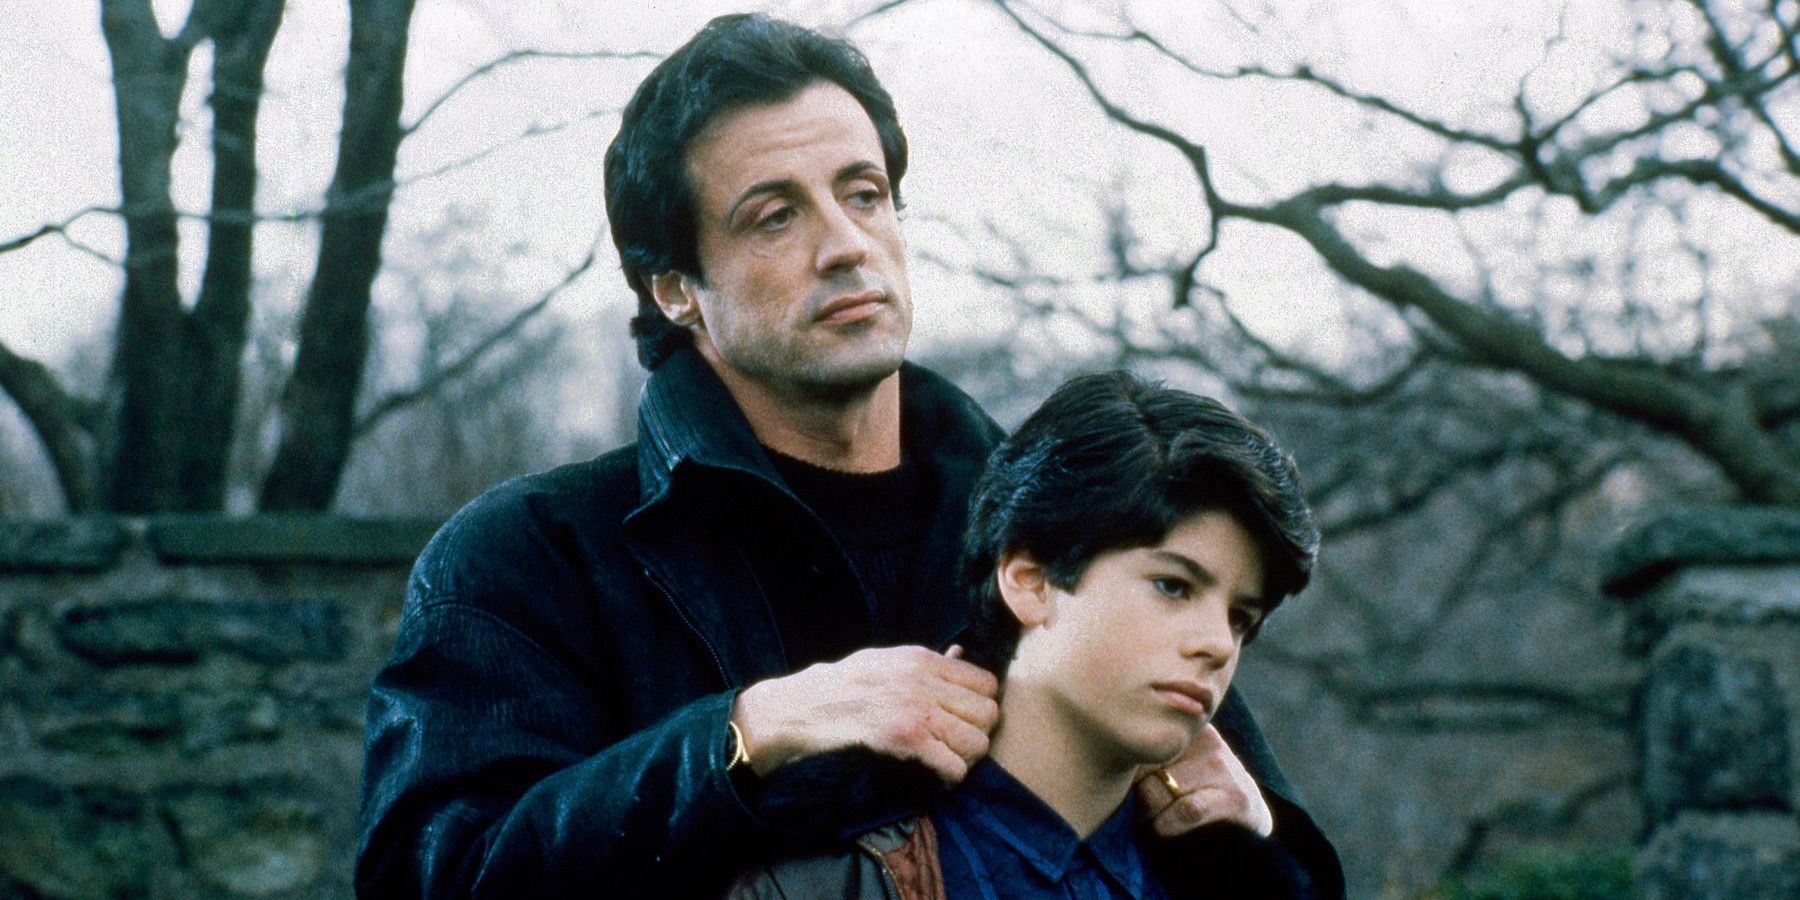 Sylvester Stallone as Rocky and Sage Stallone as Rocky Jr. in Rocky V